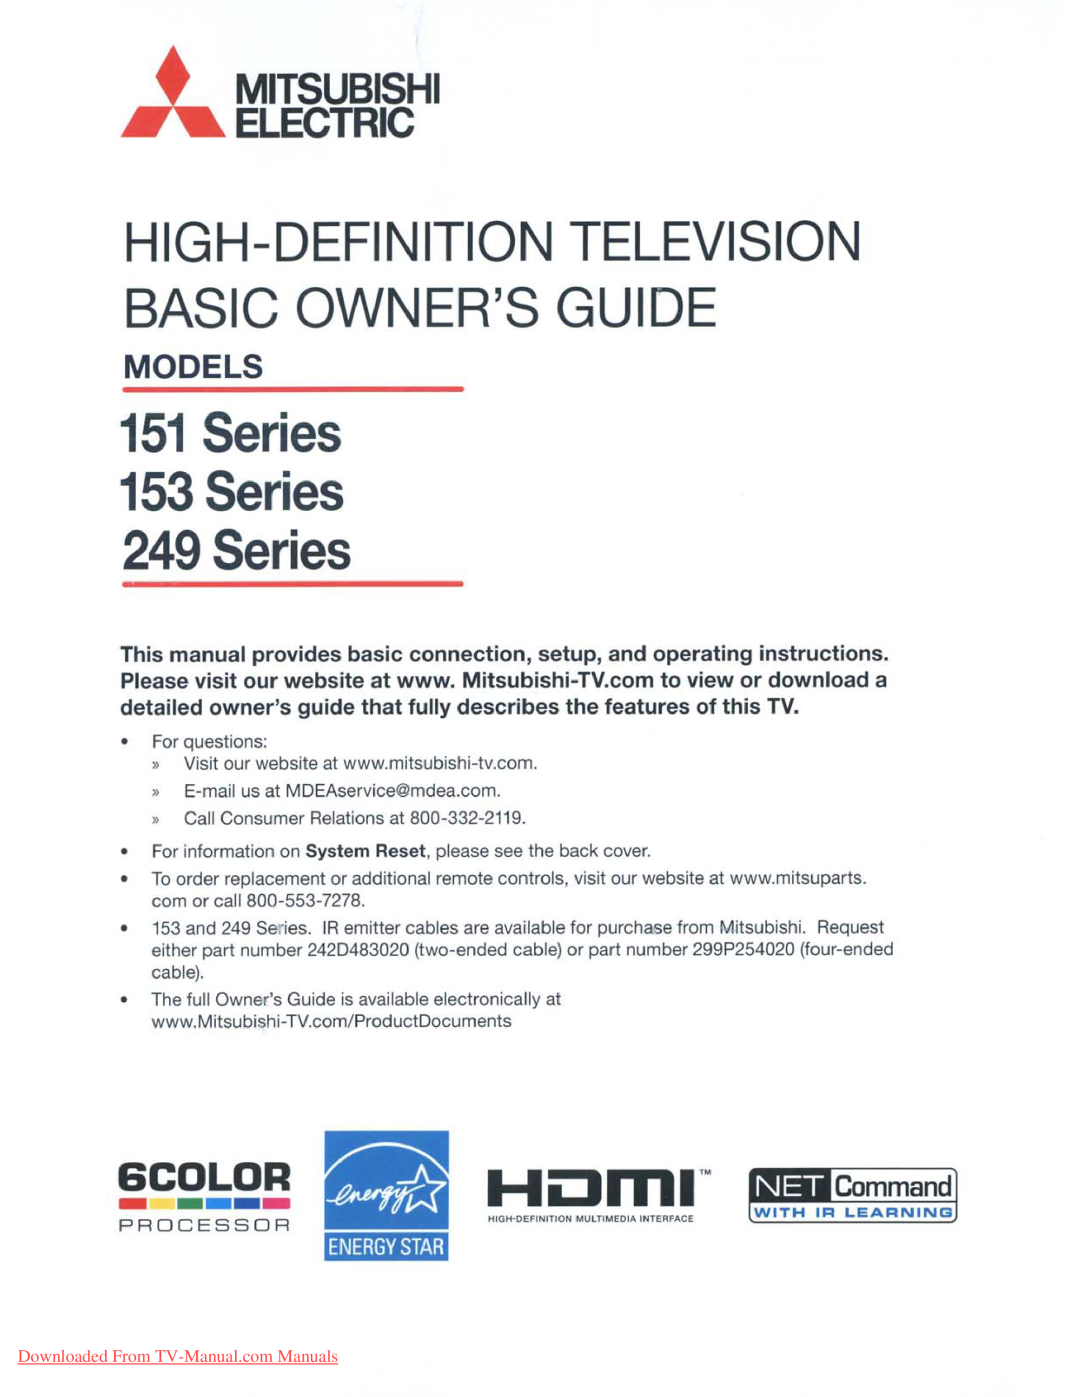 Mitsubishi Electronics 151 manual Series 153 Series 249 Series, High-Definition Television Basic Ownersguide, Models 